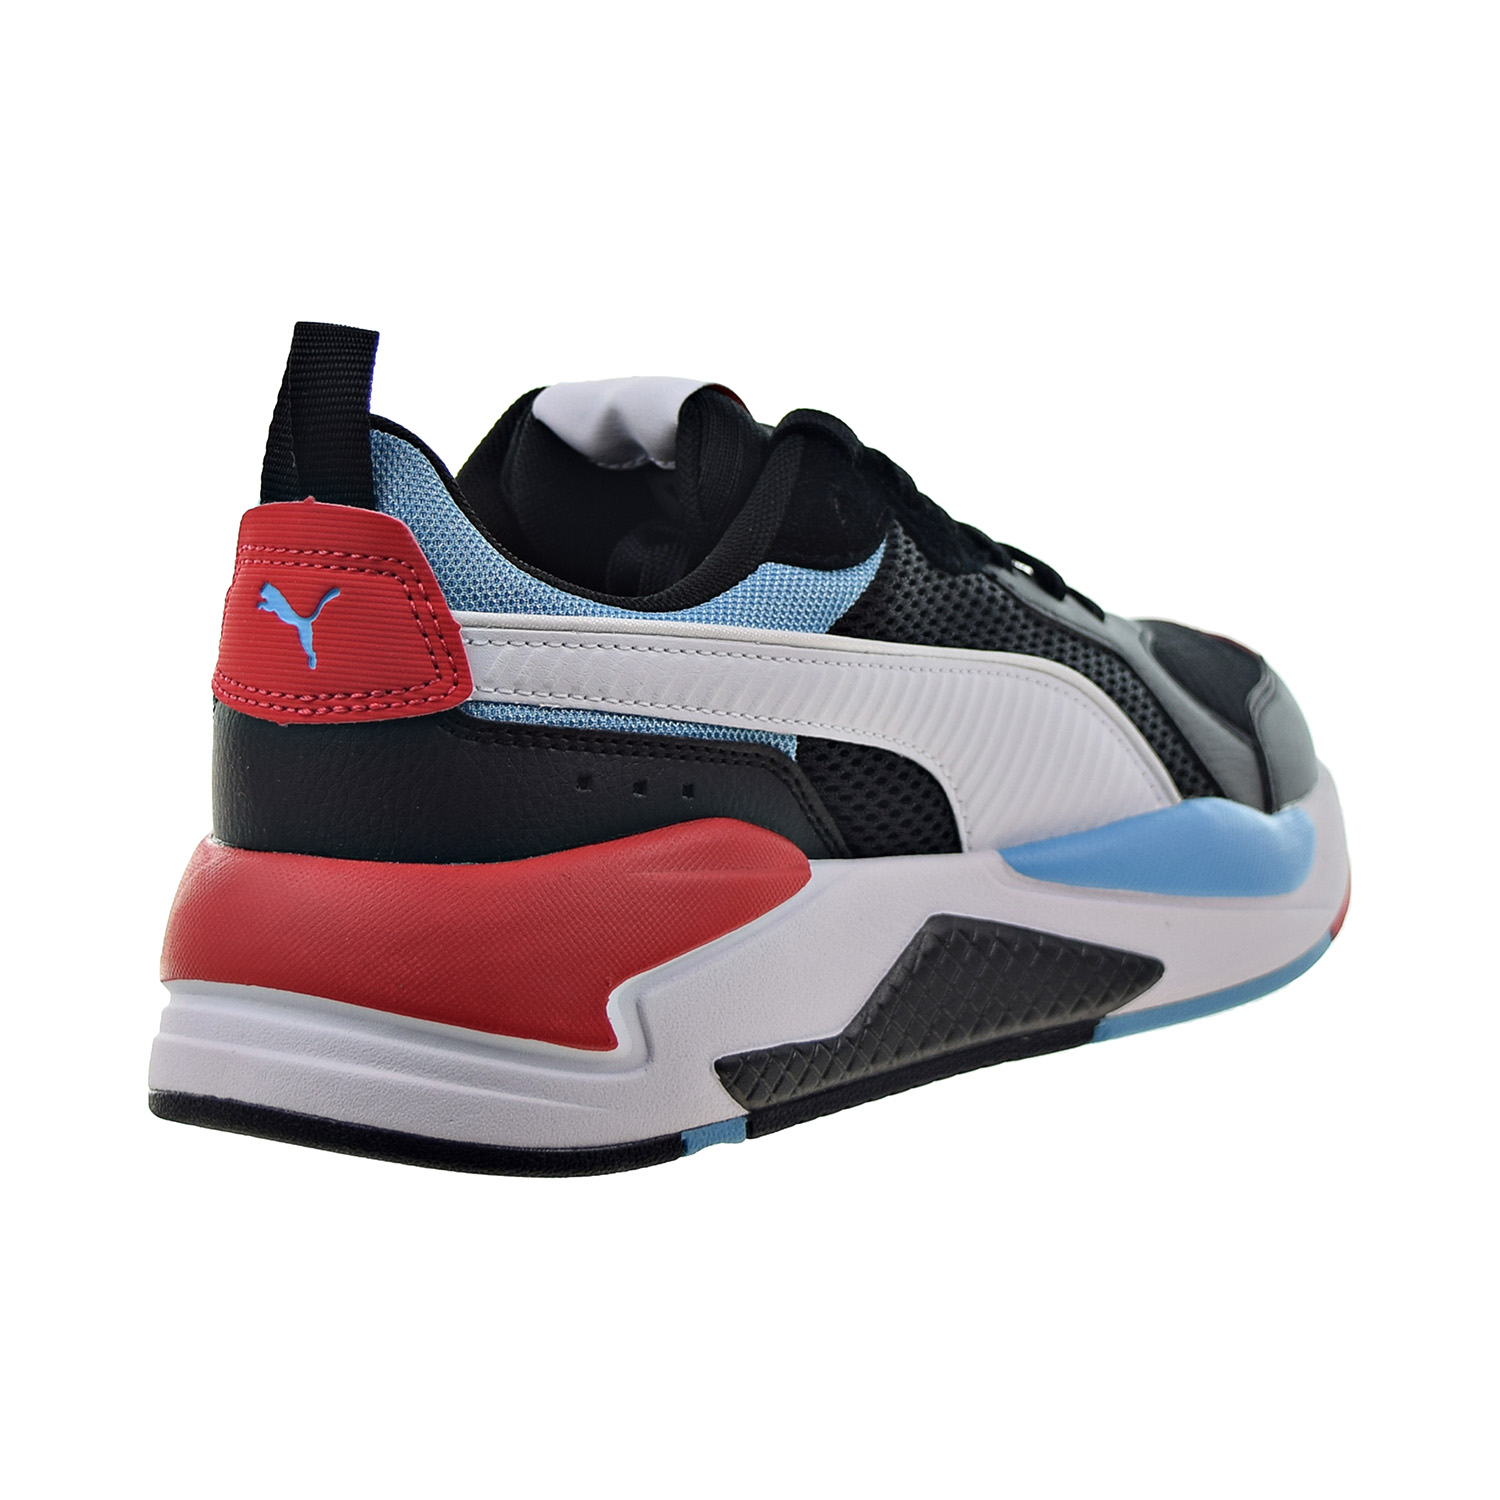 Puma X-Ray Color Block Men's Shoes Black-White-Blue-Red 373582-01 - image 3 of 6